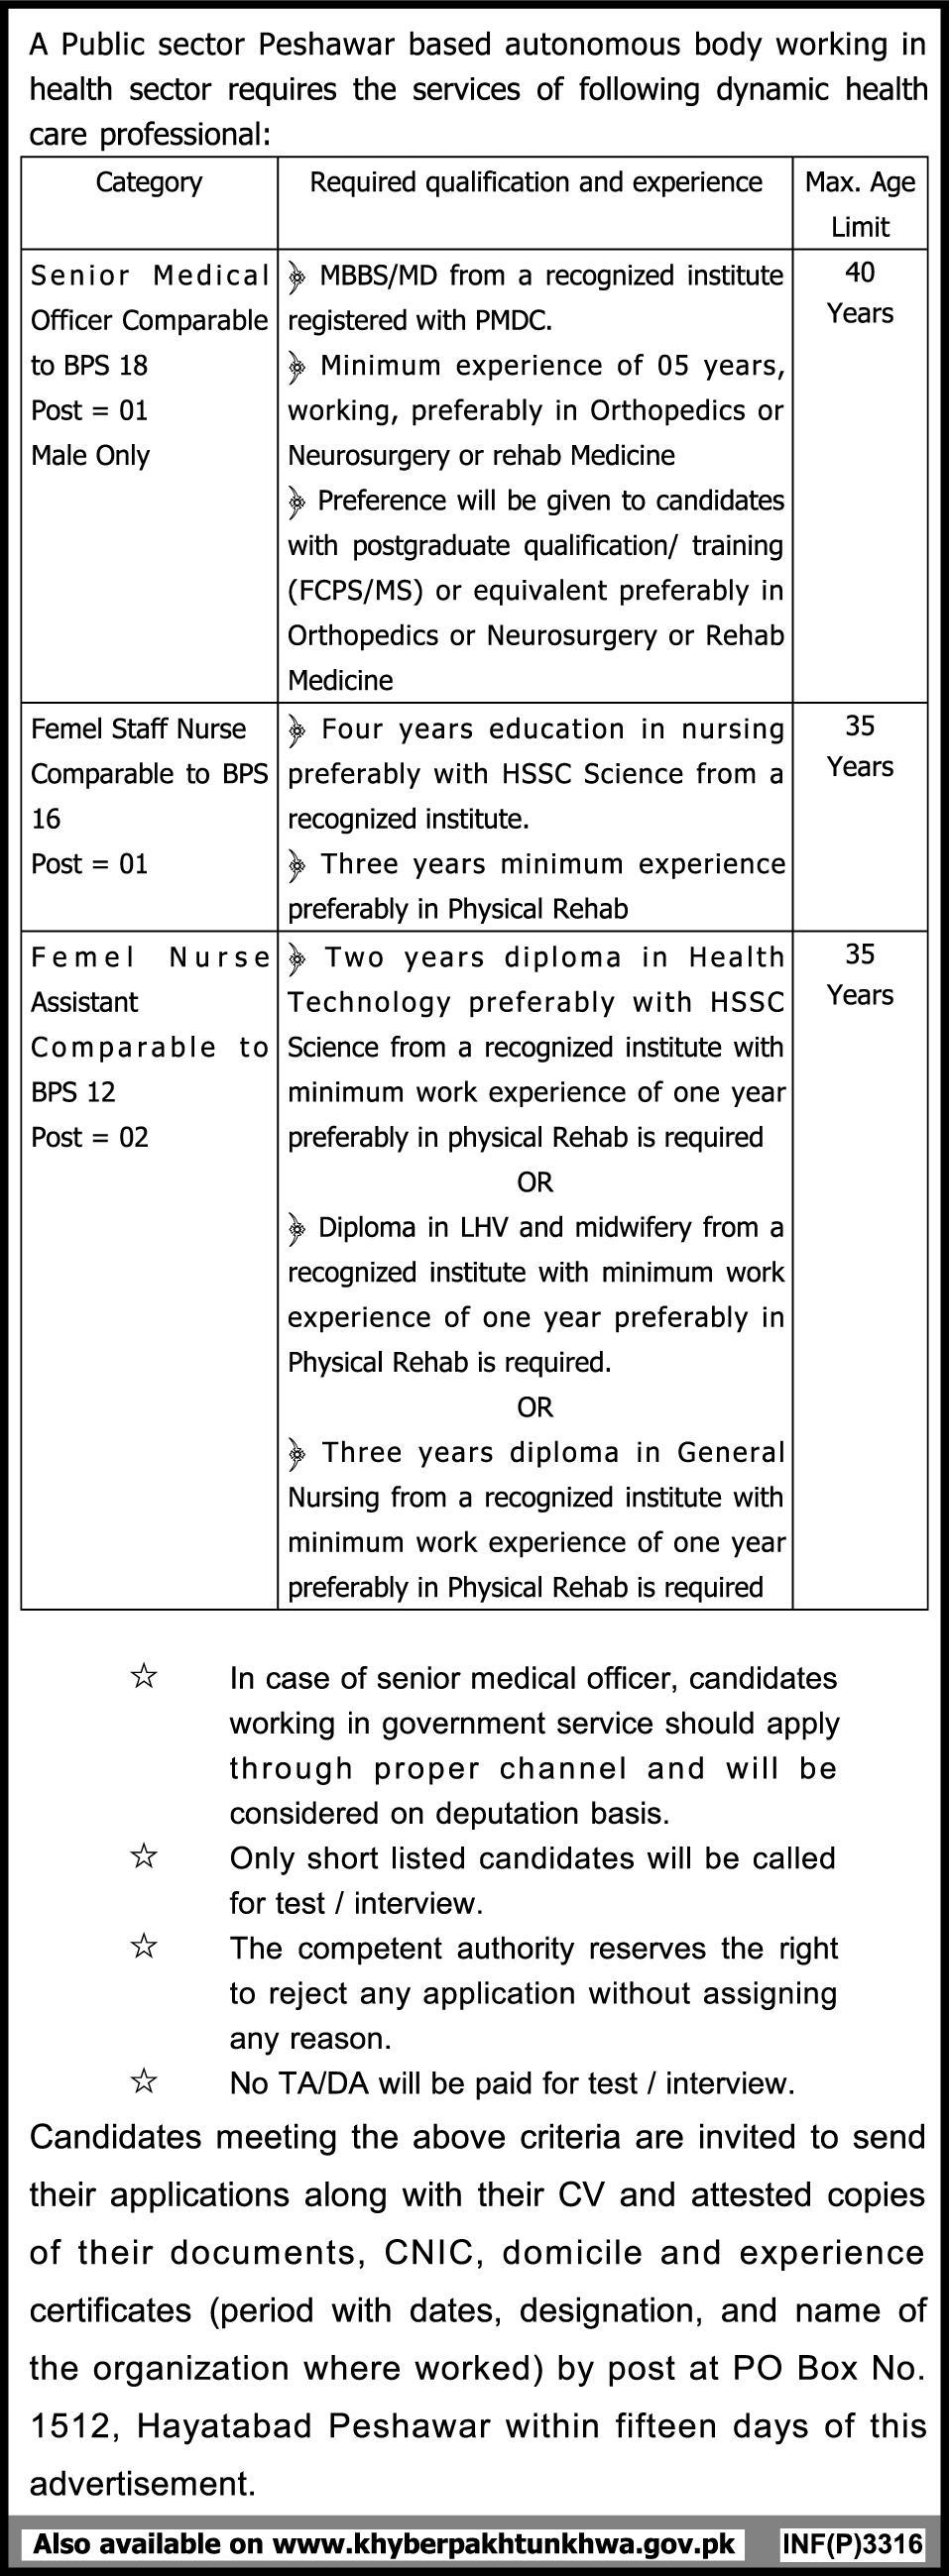 Medical Officers and Female Nurses Required by a Public Sector Health Organization